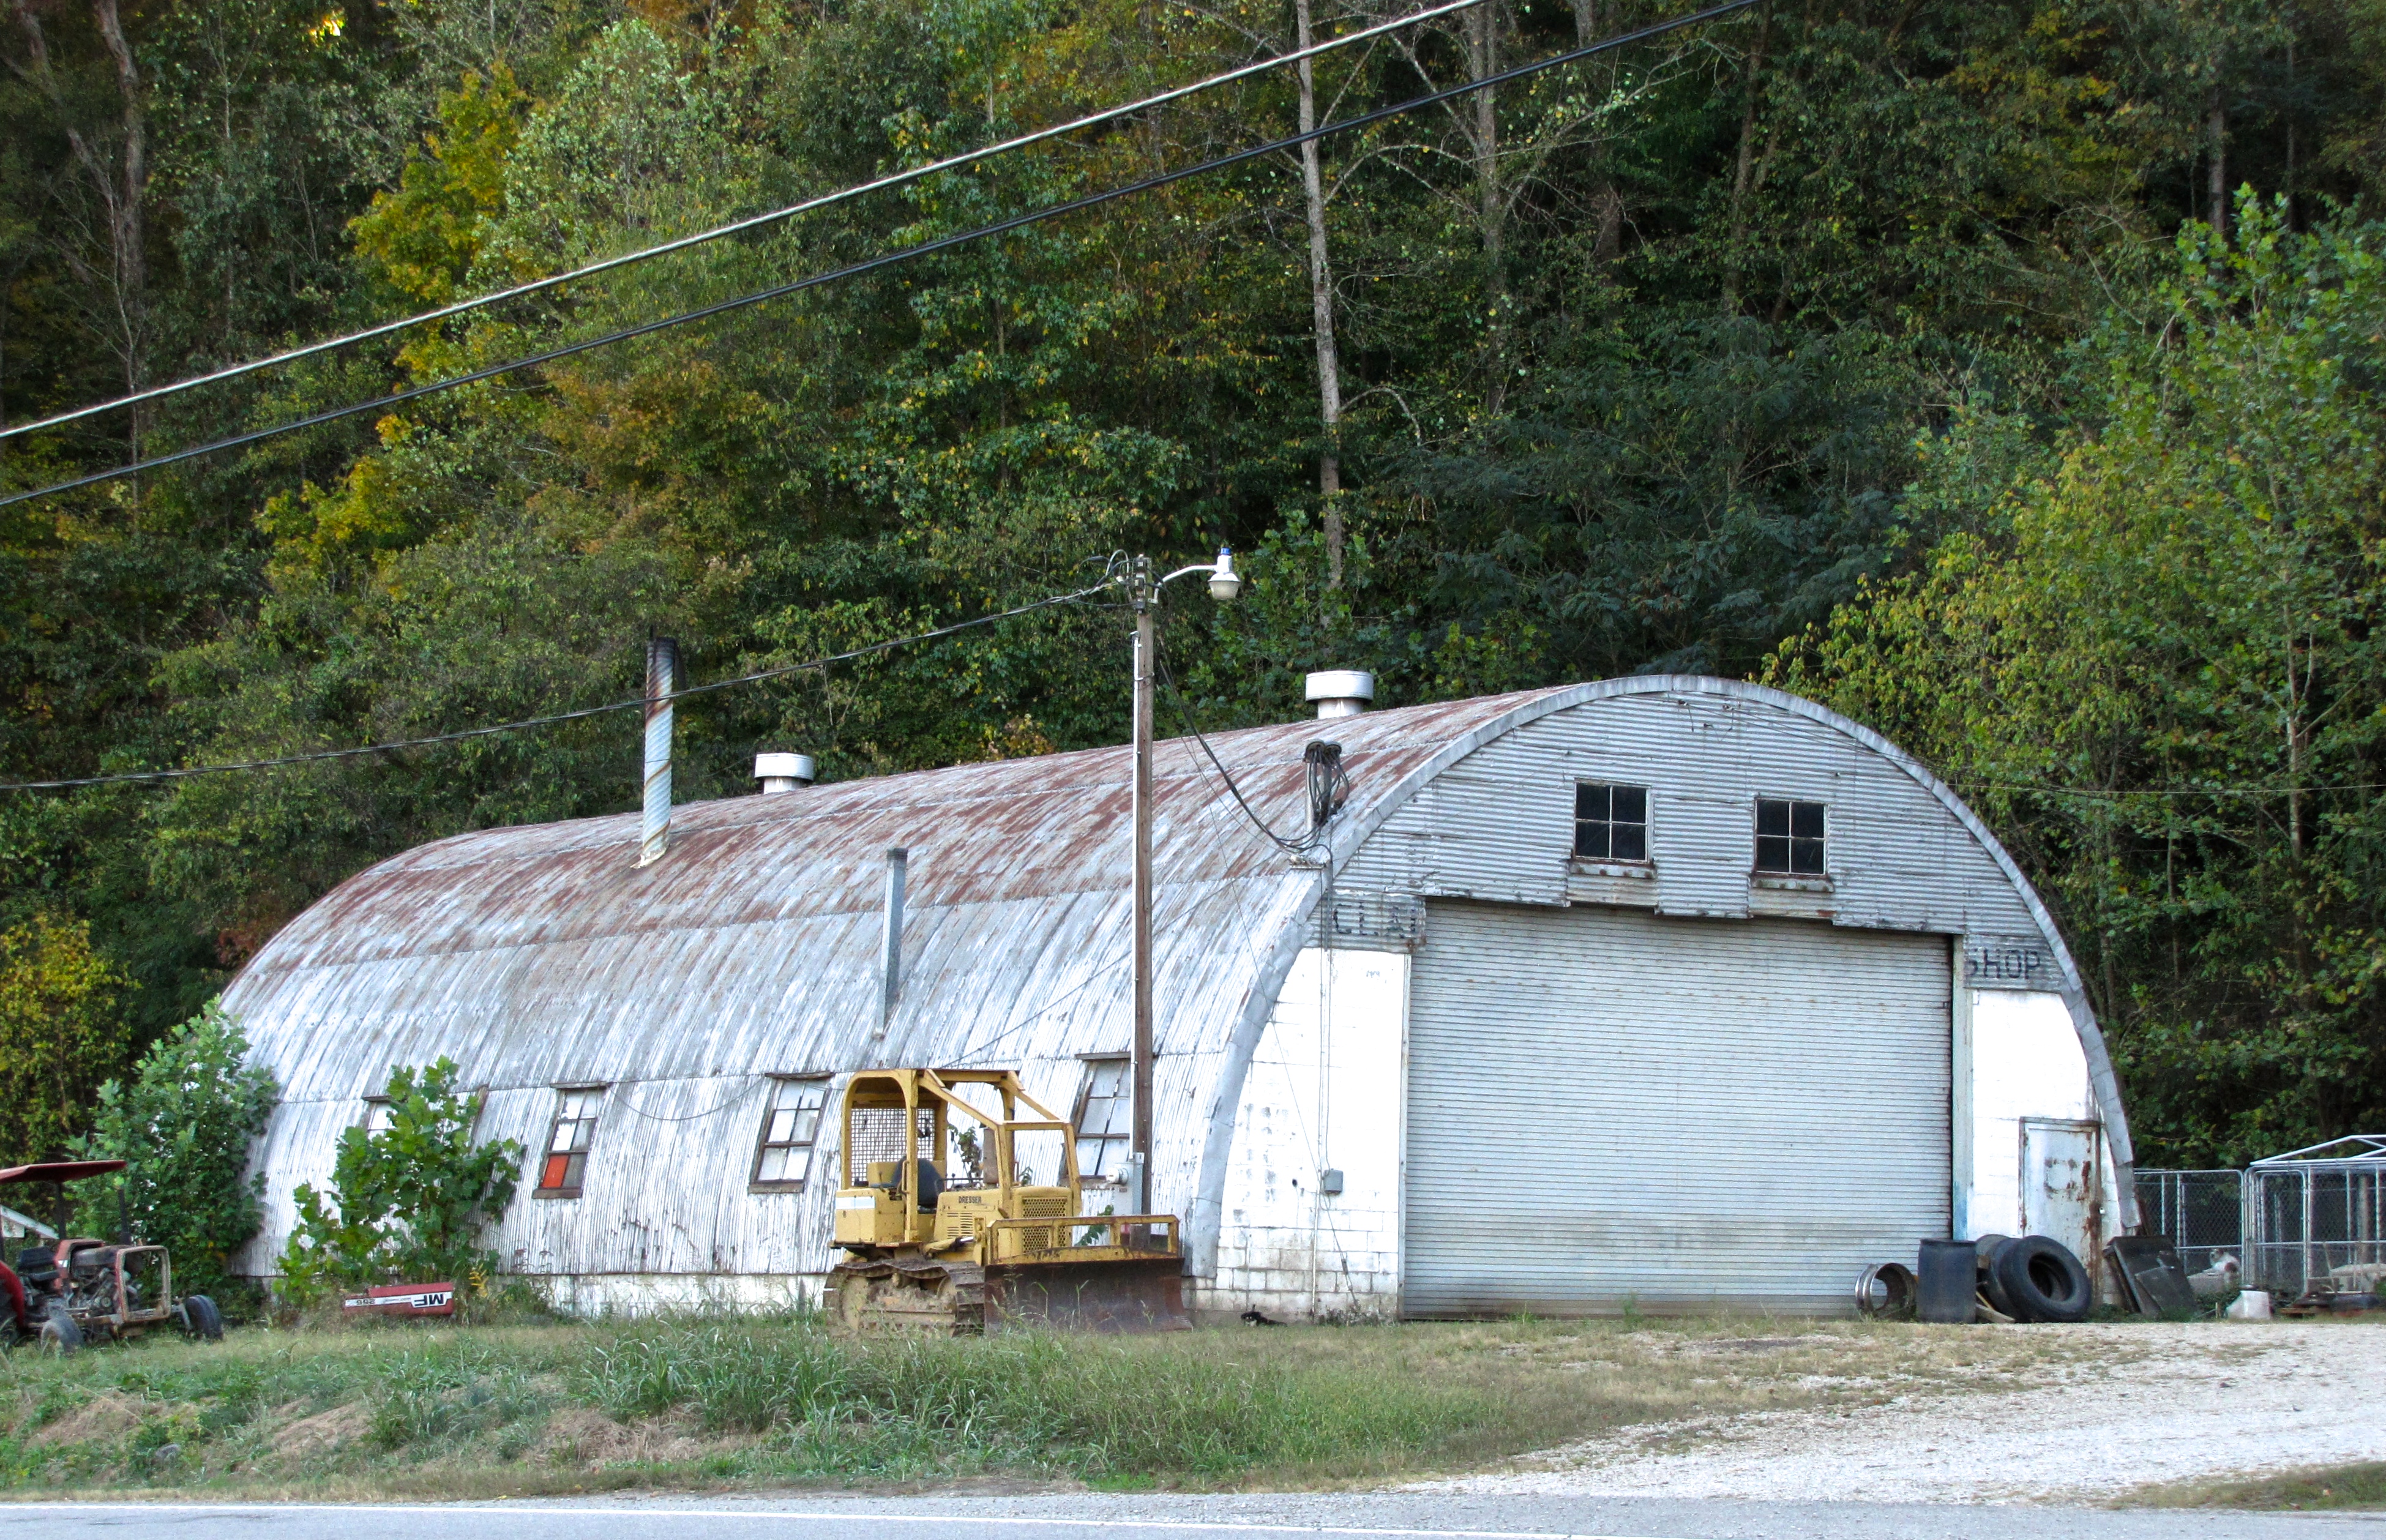 quonset hut in Clinton, CT